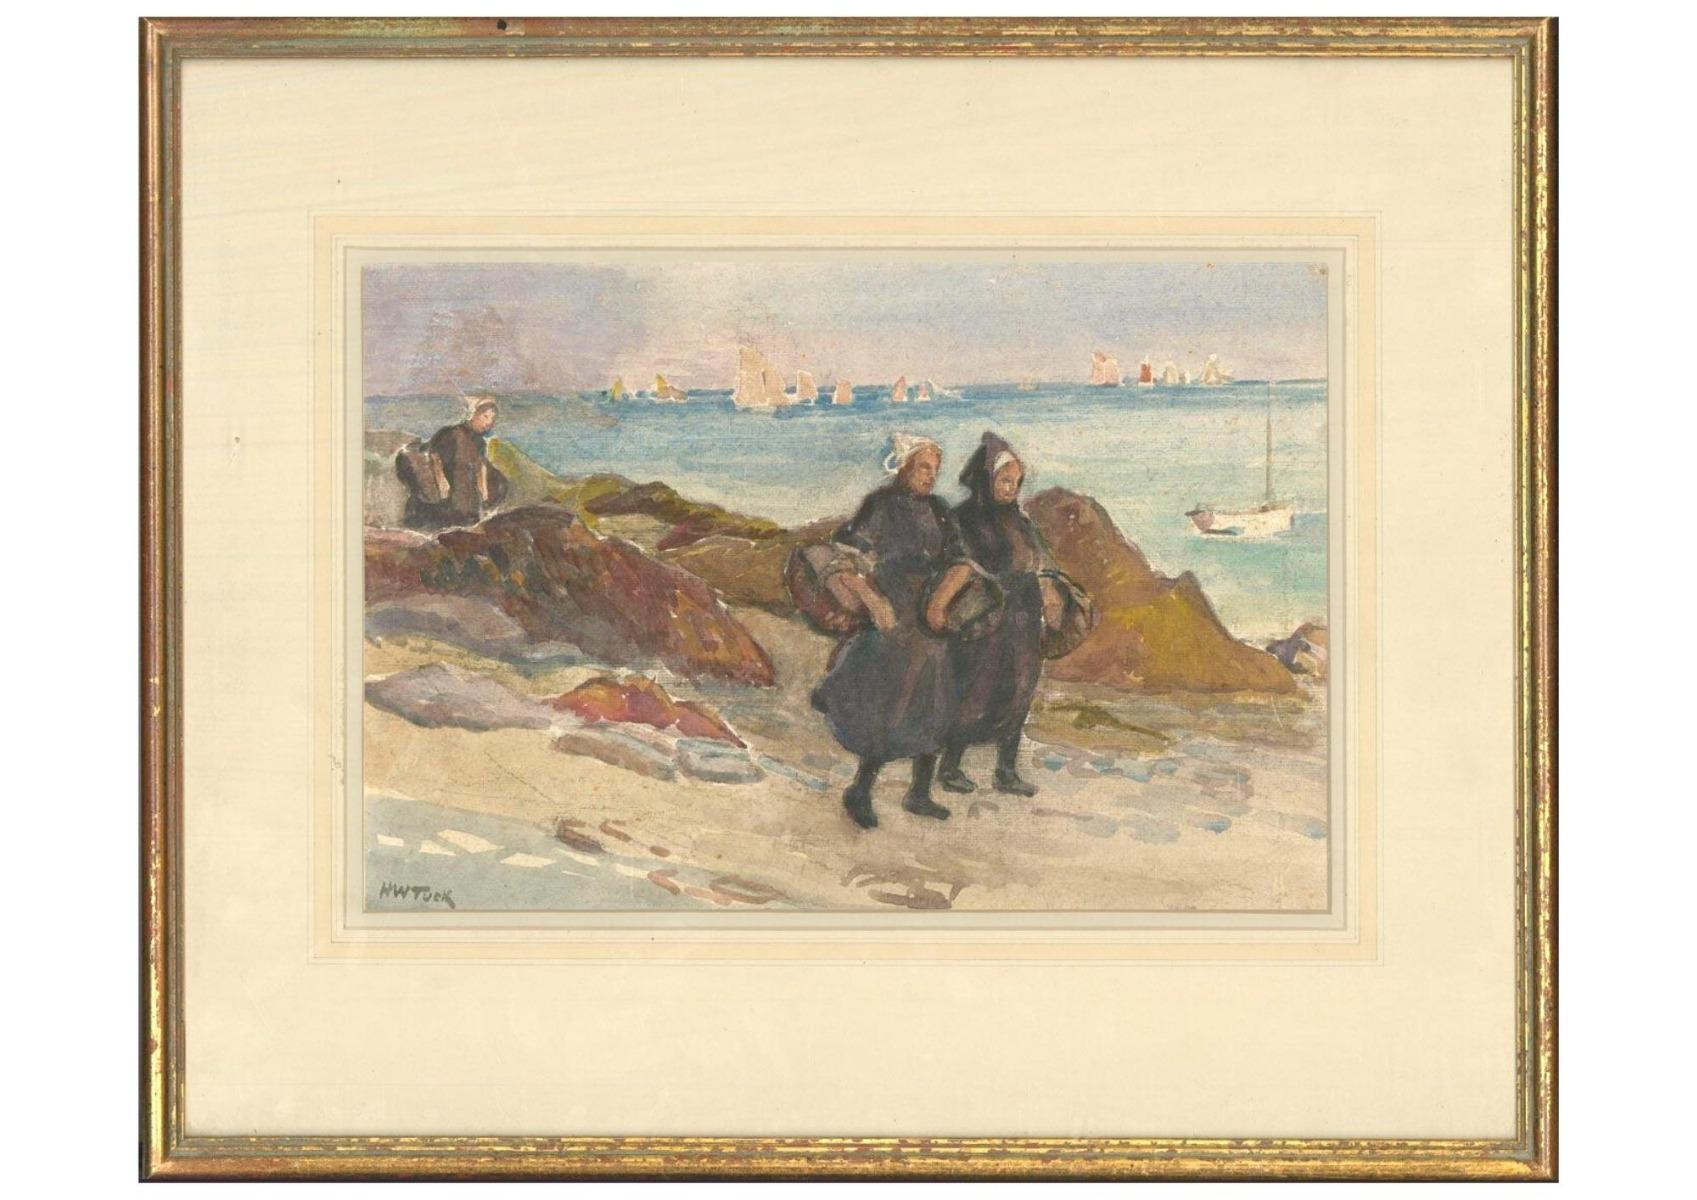 A charming scene depicting women strolling down the coastline with baskets in hand. Sailboats can be seen in the distance on the calm sea. Signed to the lower right. On wove.




